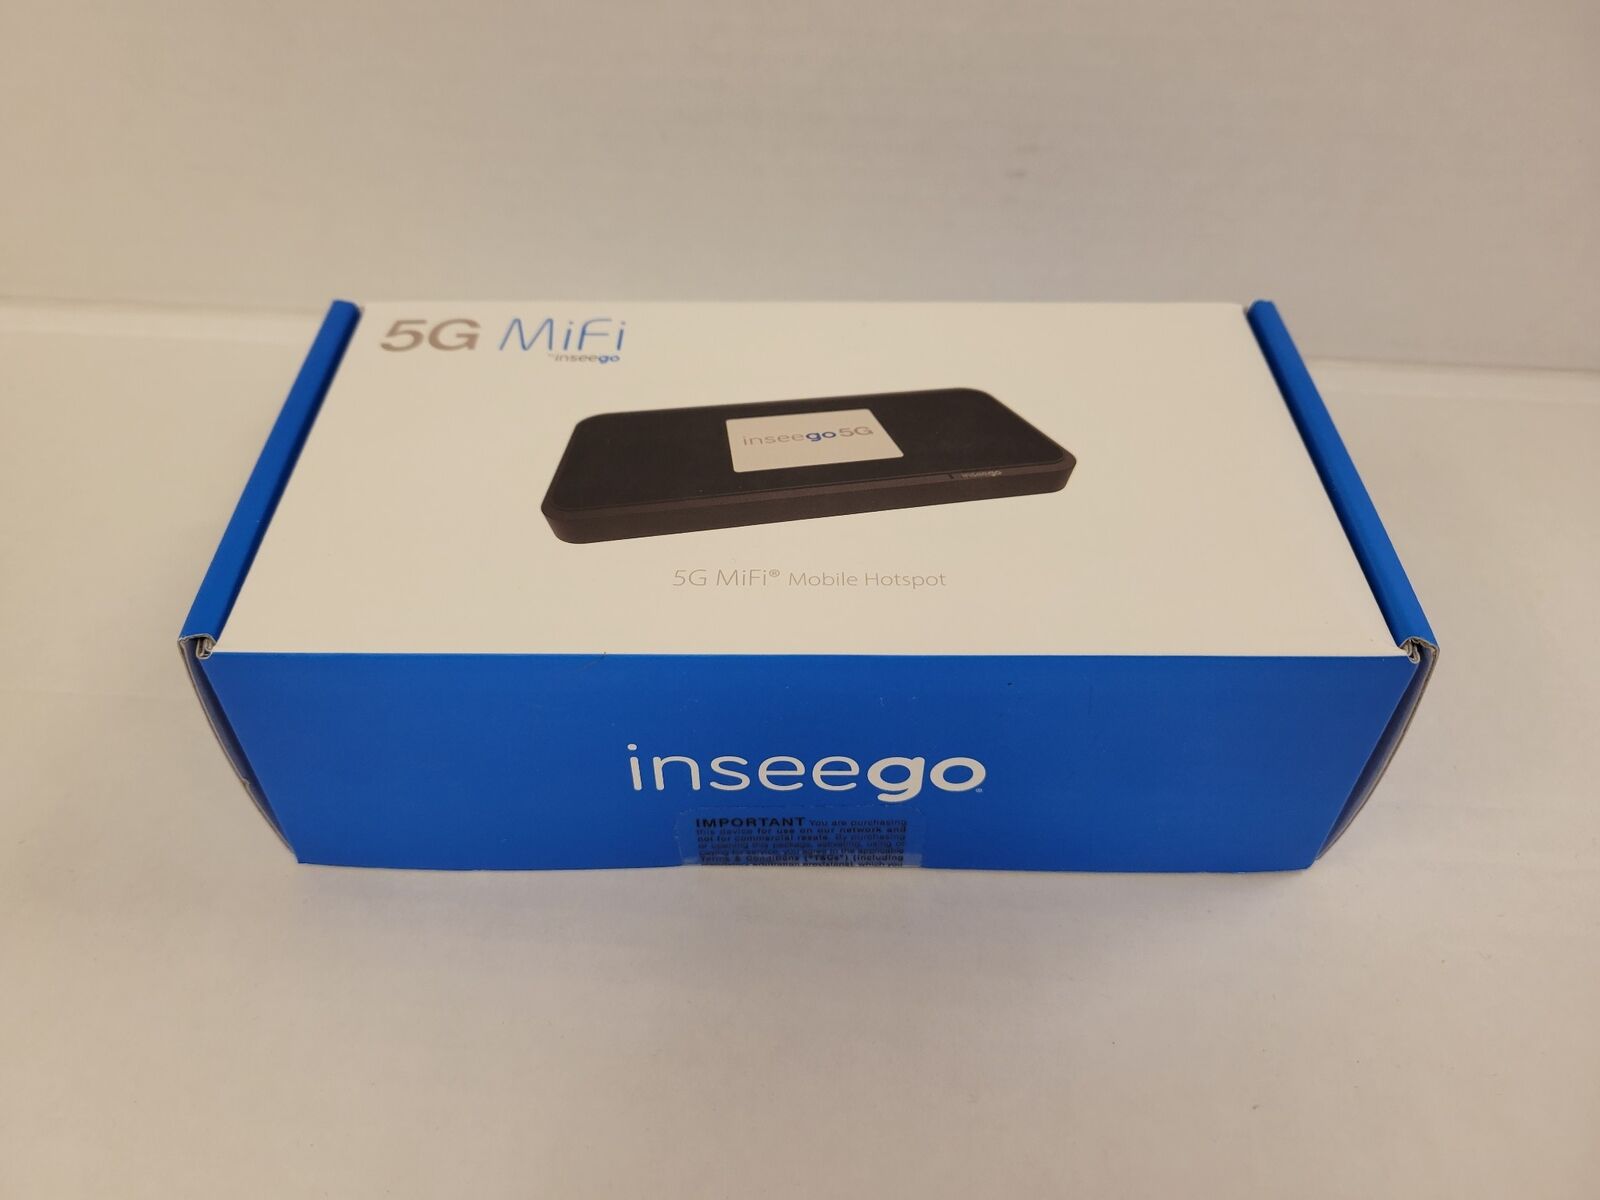 NEW Inseego 5G MiFi M2000 Black Hotspot T-MOBILE **SEALED**